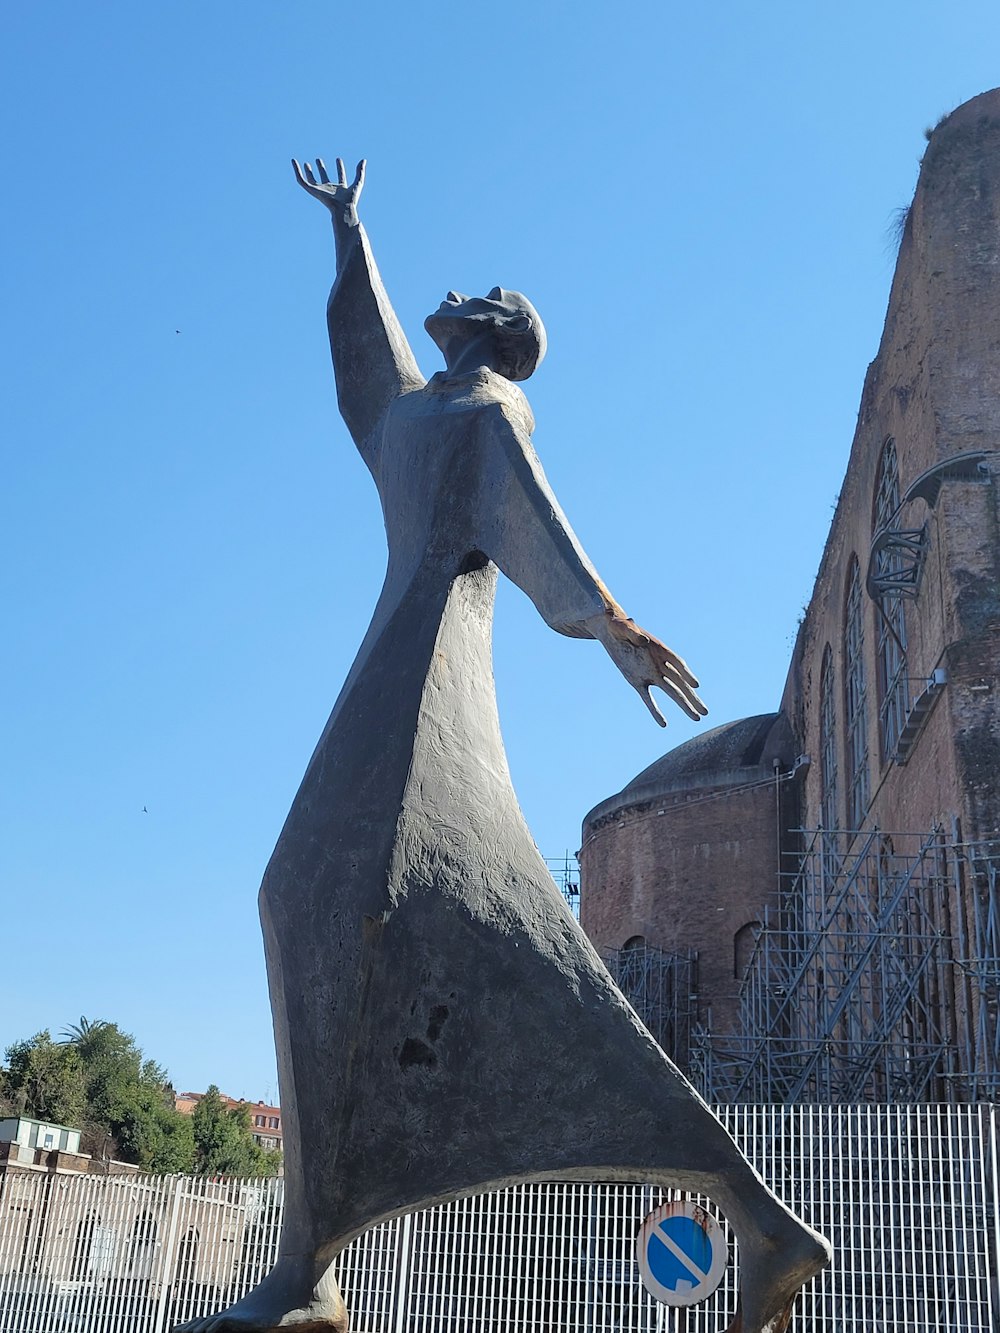 a statue of a woman reaching up to the sky